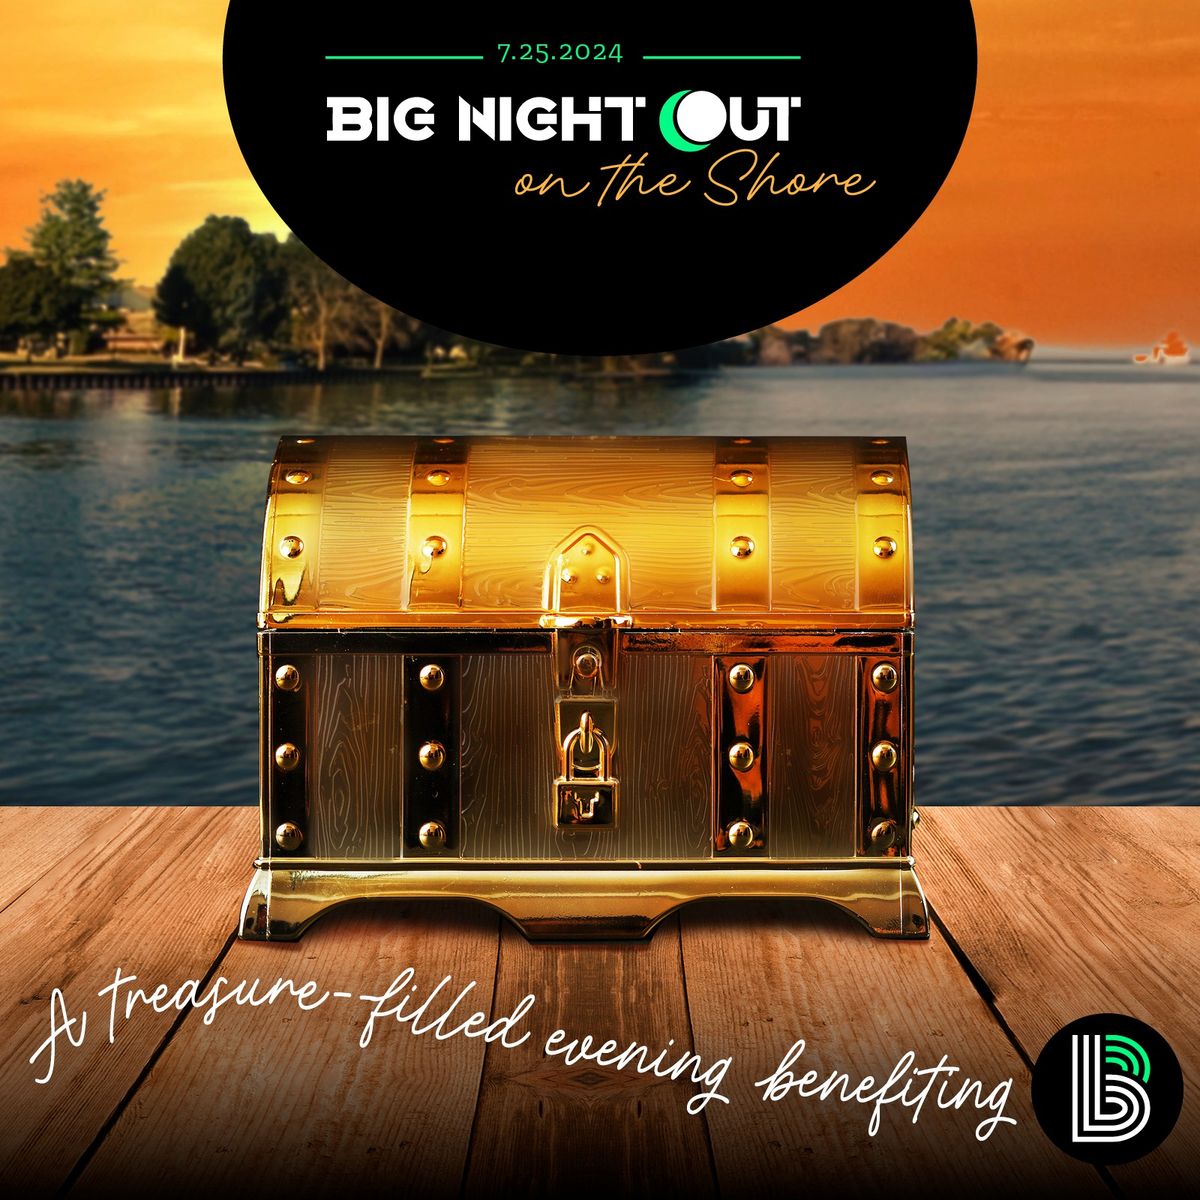 Big Night Out - on the Shore